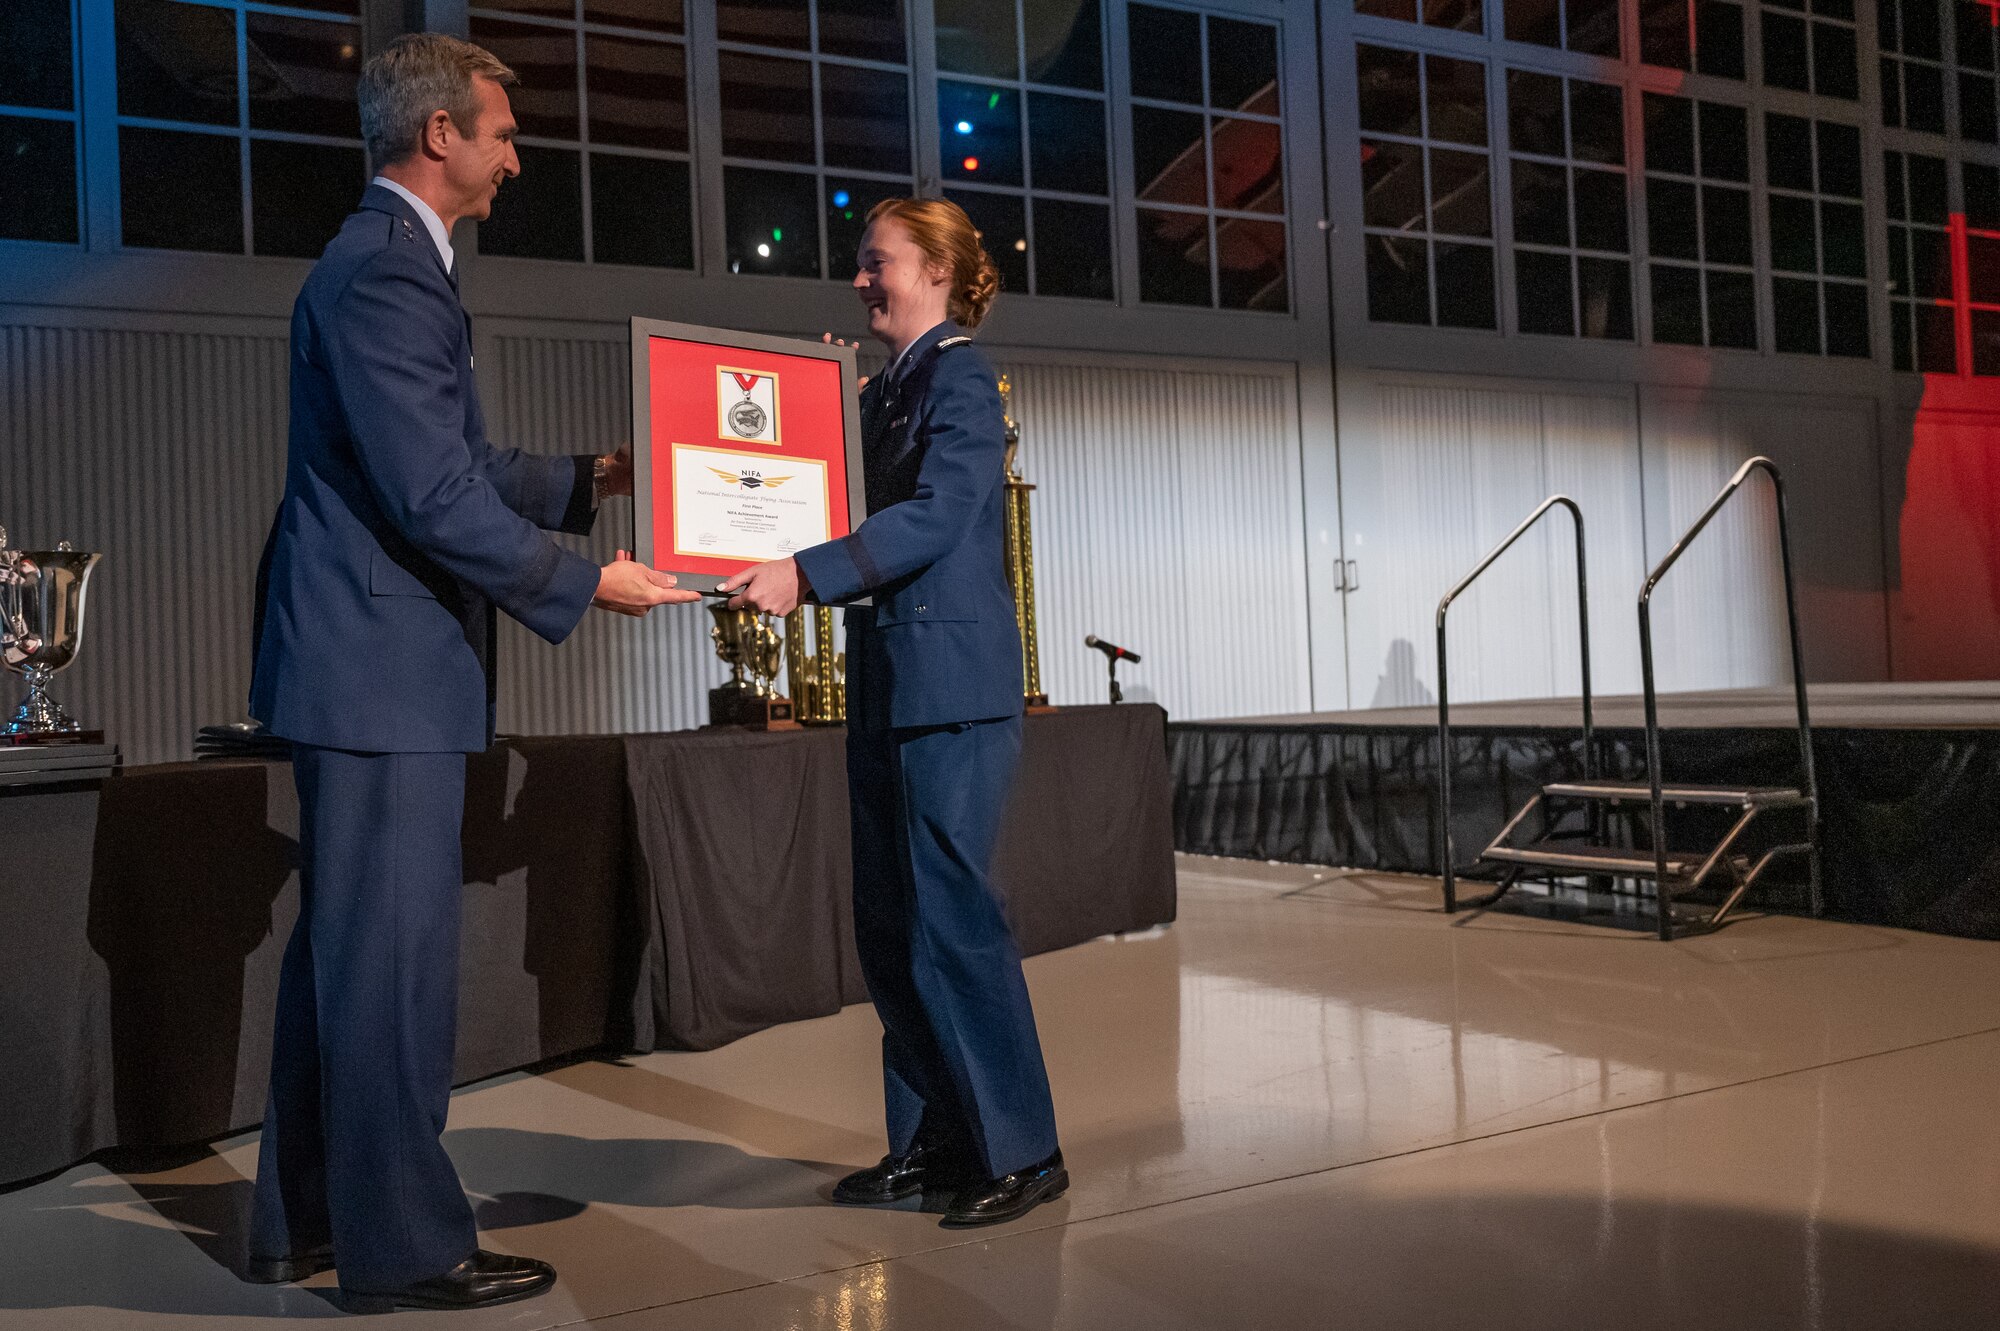 NIFA’s SAFECON brings the top three collegiate aviation teams from 10 regions across the United States to compete head-to-head in more than a dozen technical events, which culminates with top honors given within various categories during the post-event, evening awards banquet.